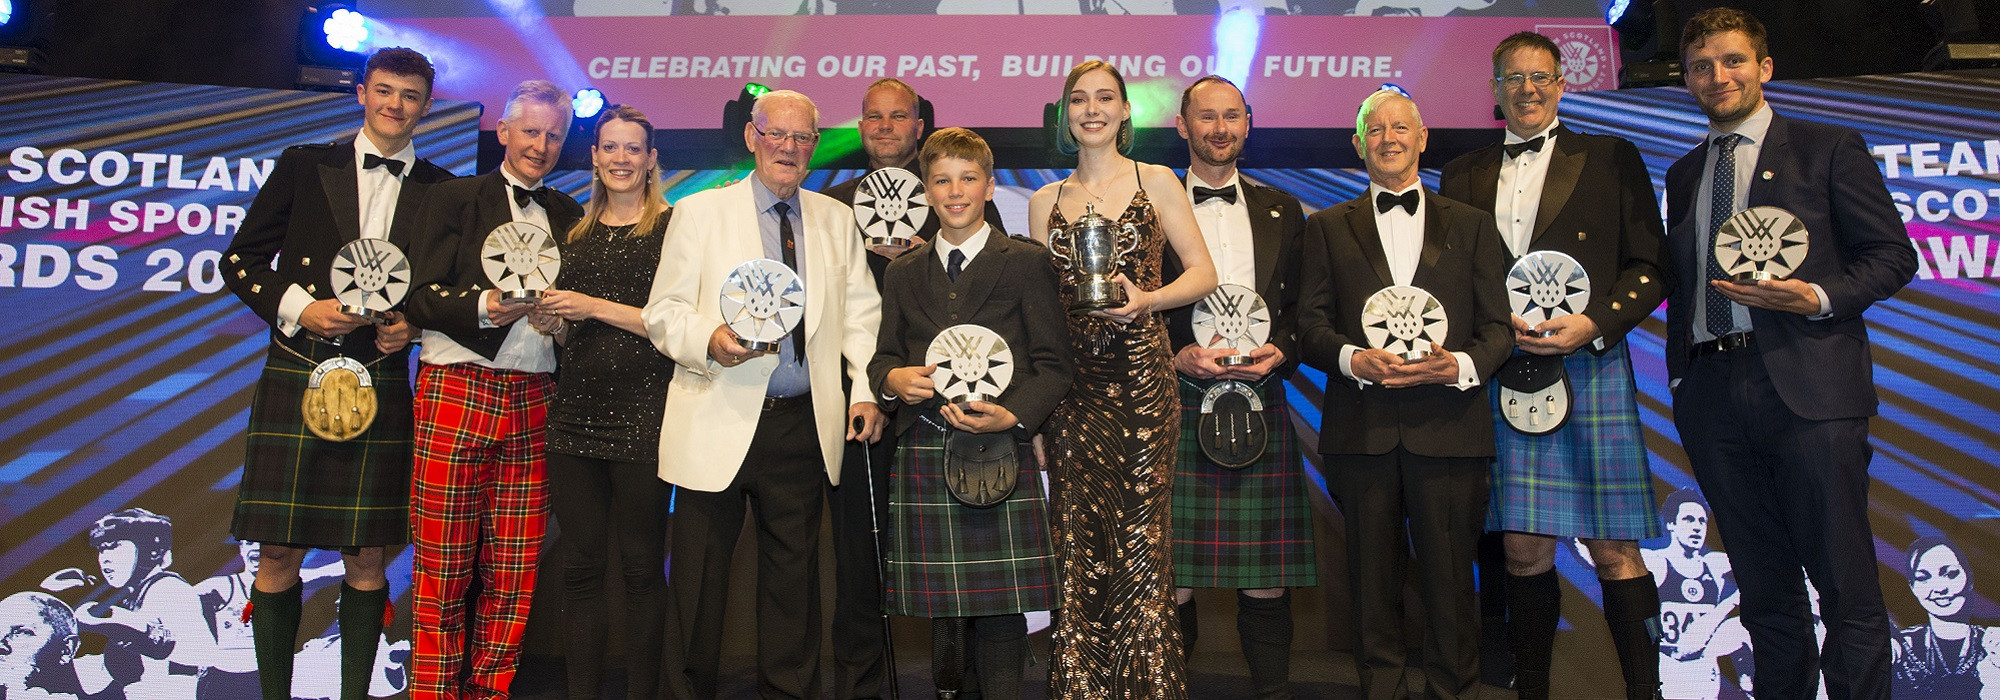 A number of prizes were handed out at the Team Scotland Scottish Sports Awards ©Team Scotland